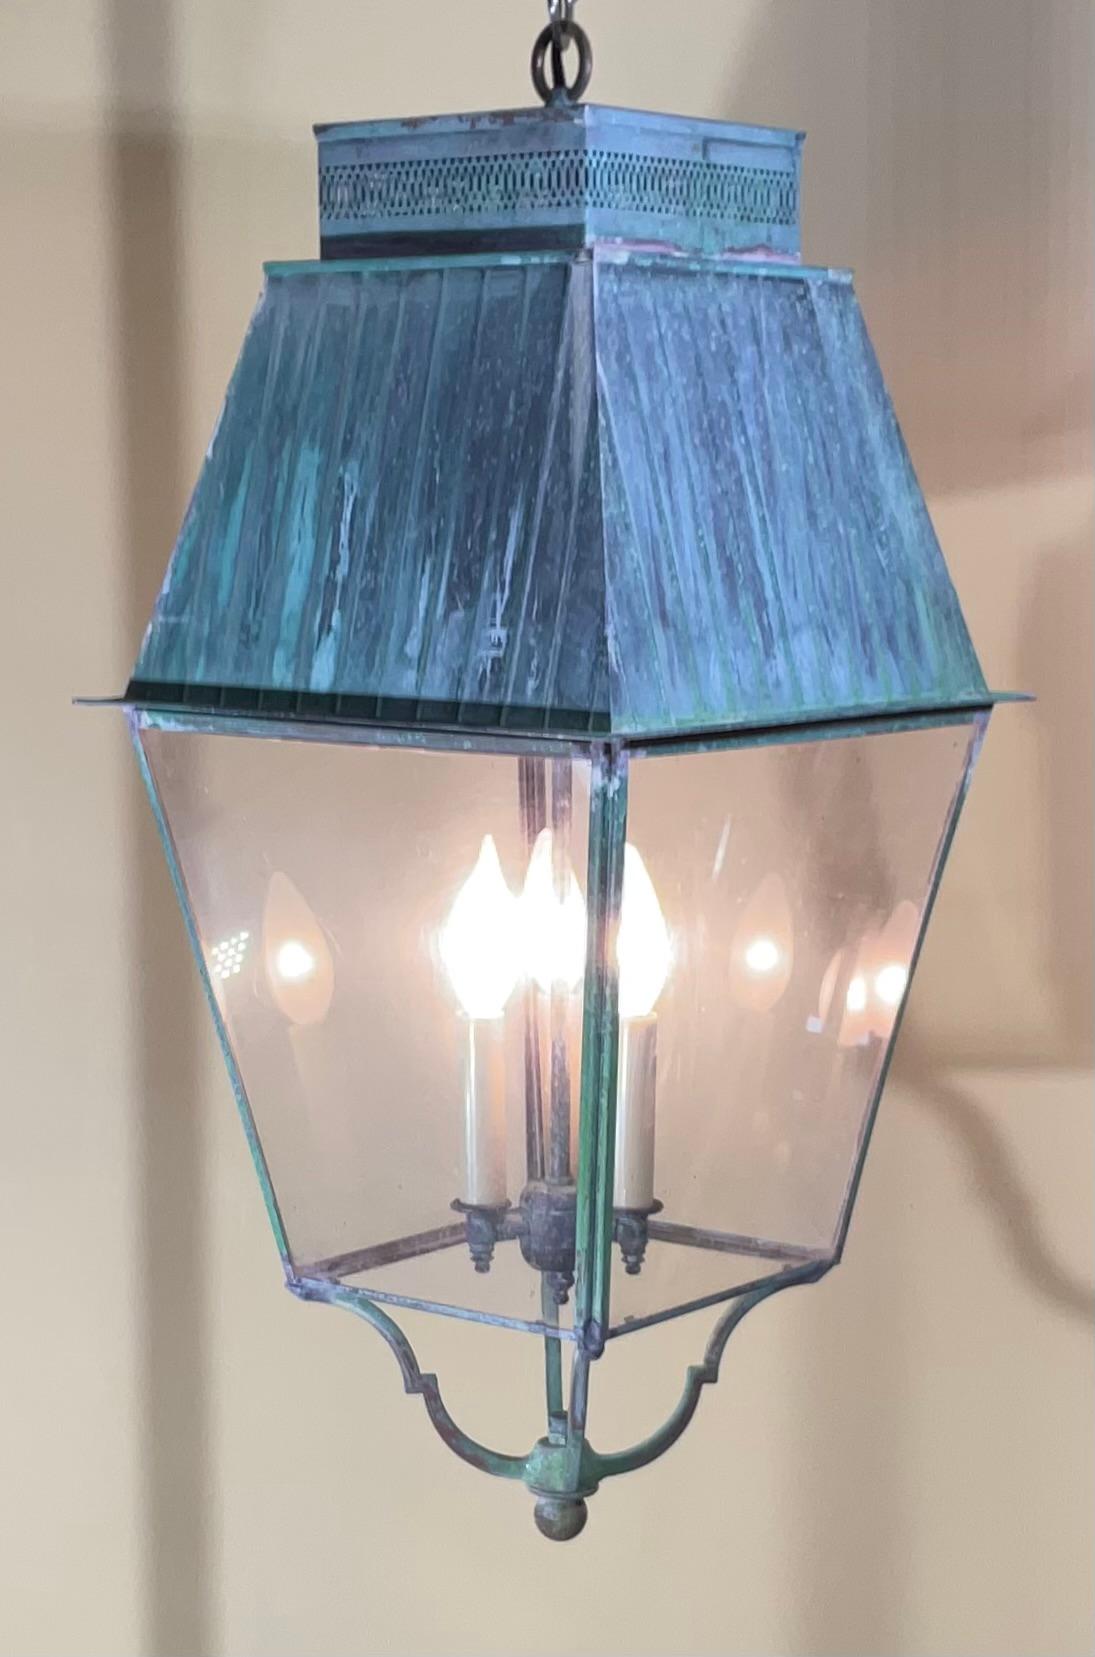 elegant vintage hanging lantern made of solid brass, with three 60/watt  lights 
Original clear acrylic sides.
Very nice patina 
New Canopy and chain included.

